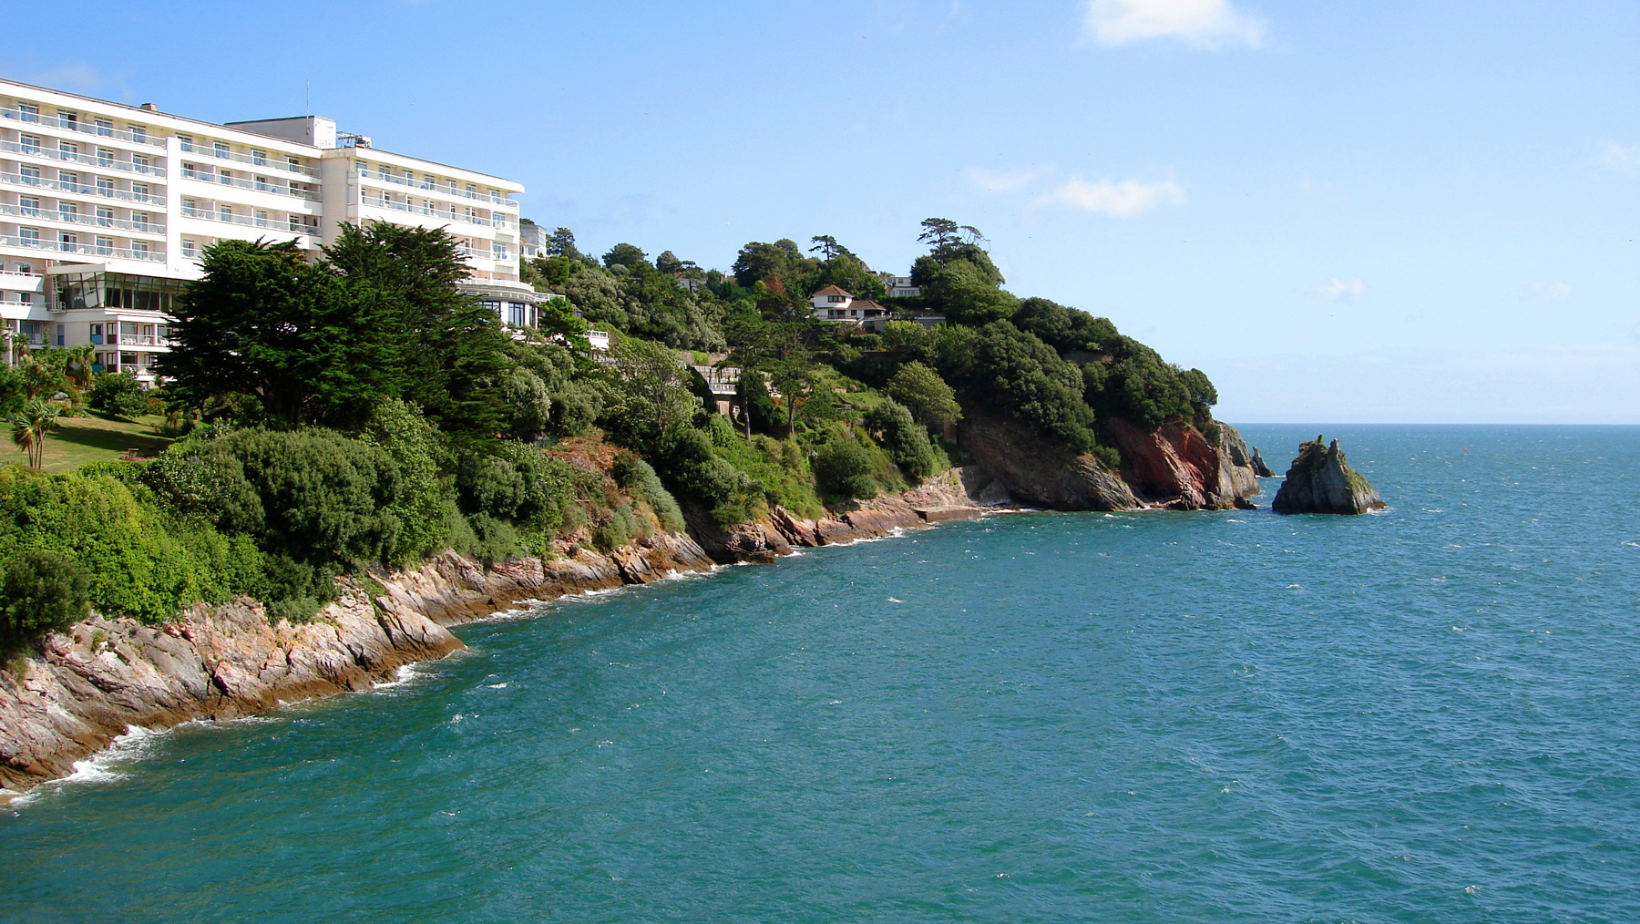 Holiday in Torquay